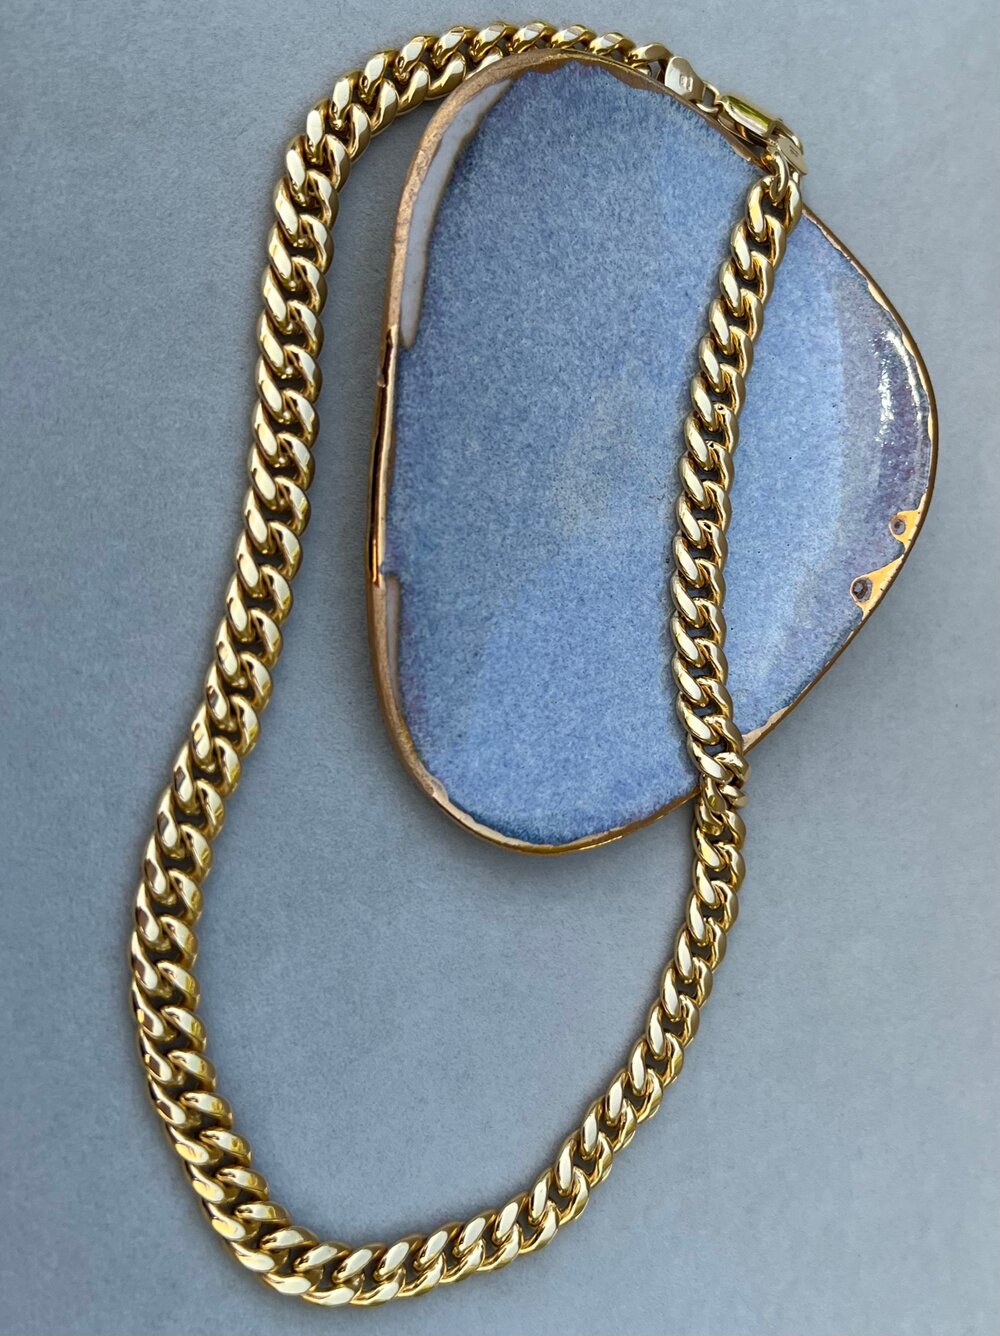 14K Gold Plated 16 Blue Cuban Link Chain Necklace